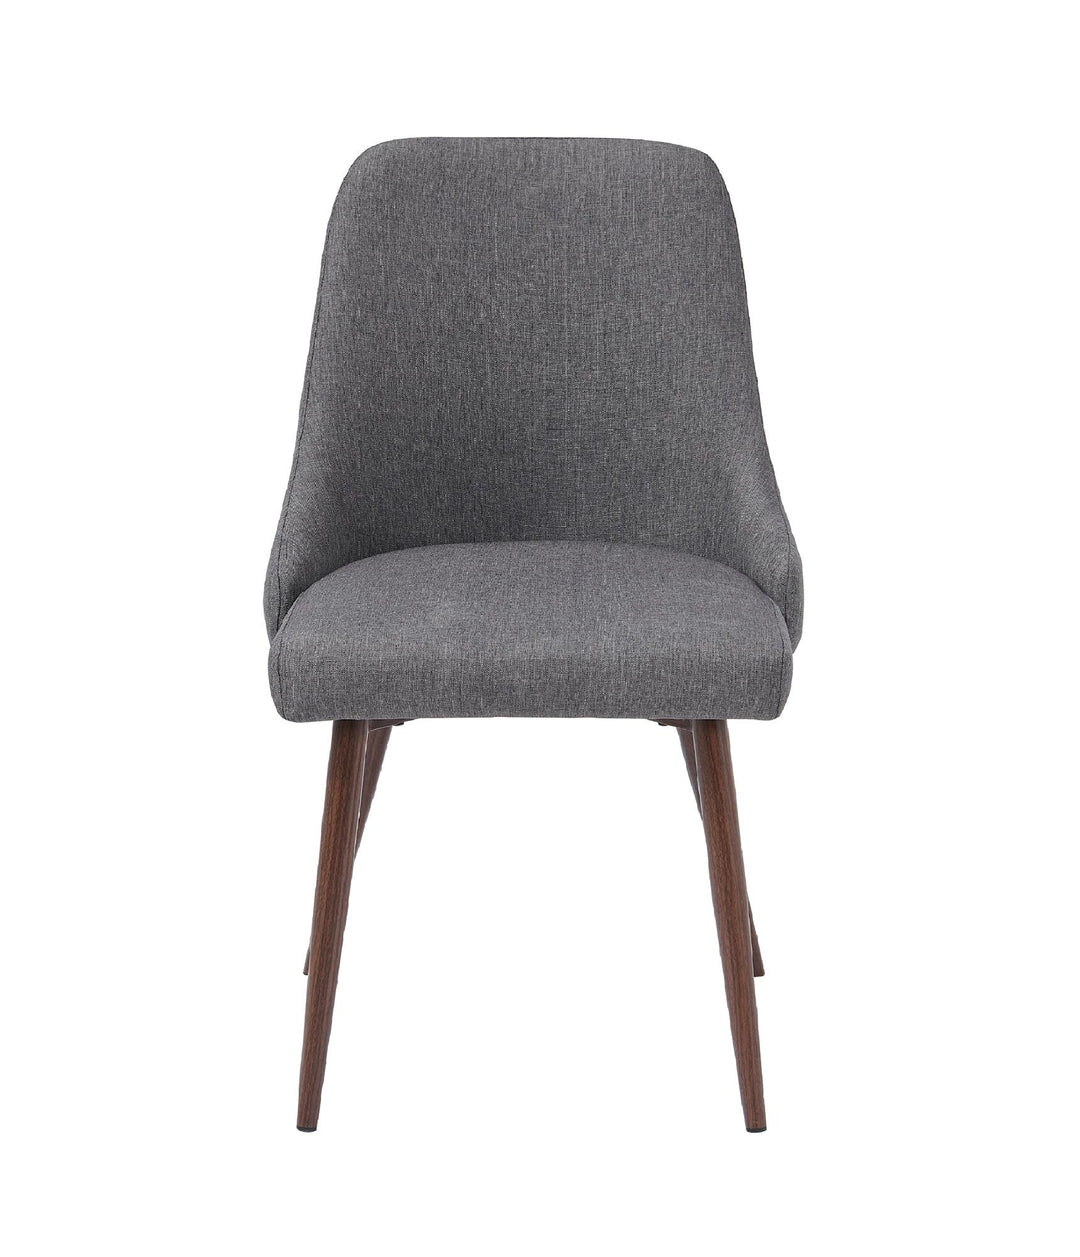 Set of 2 upholstered dining chair - Gray (Solid)